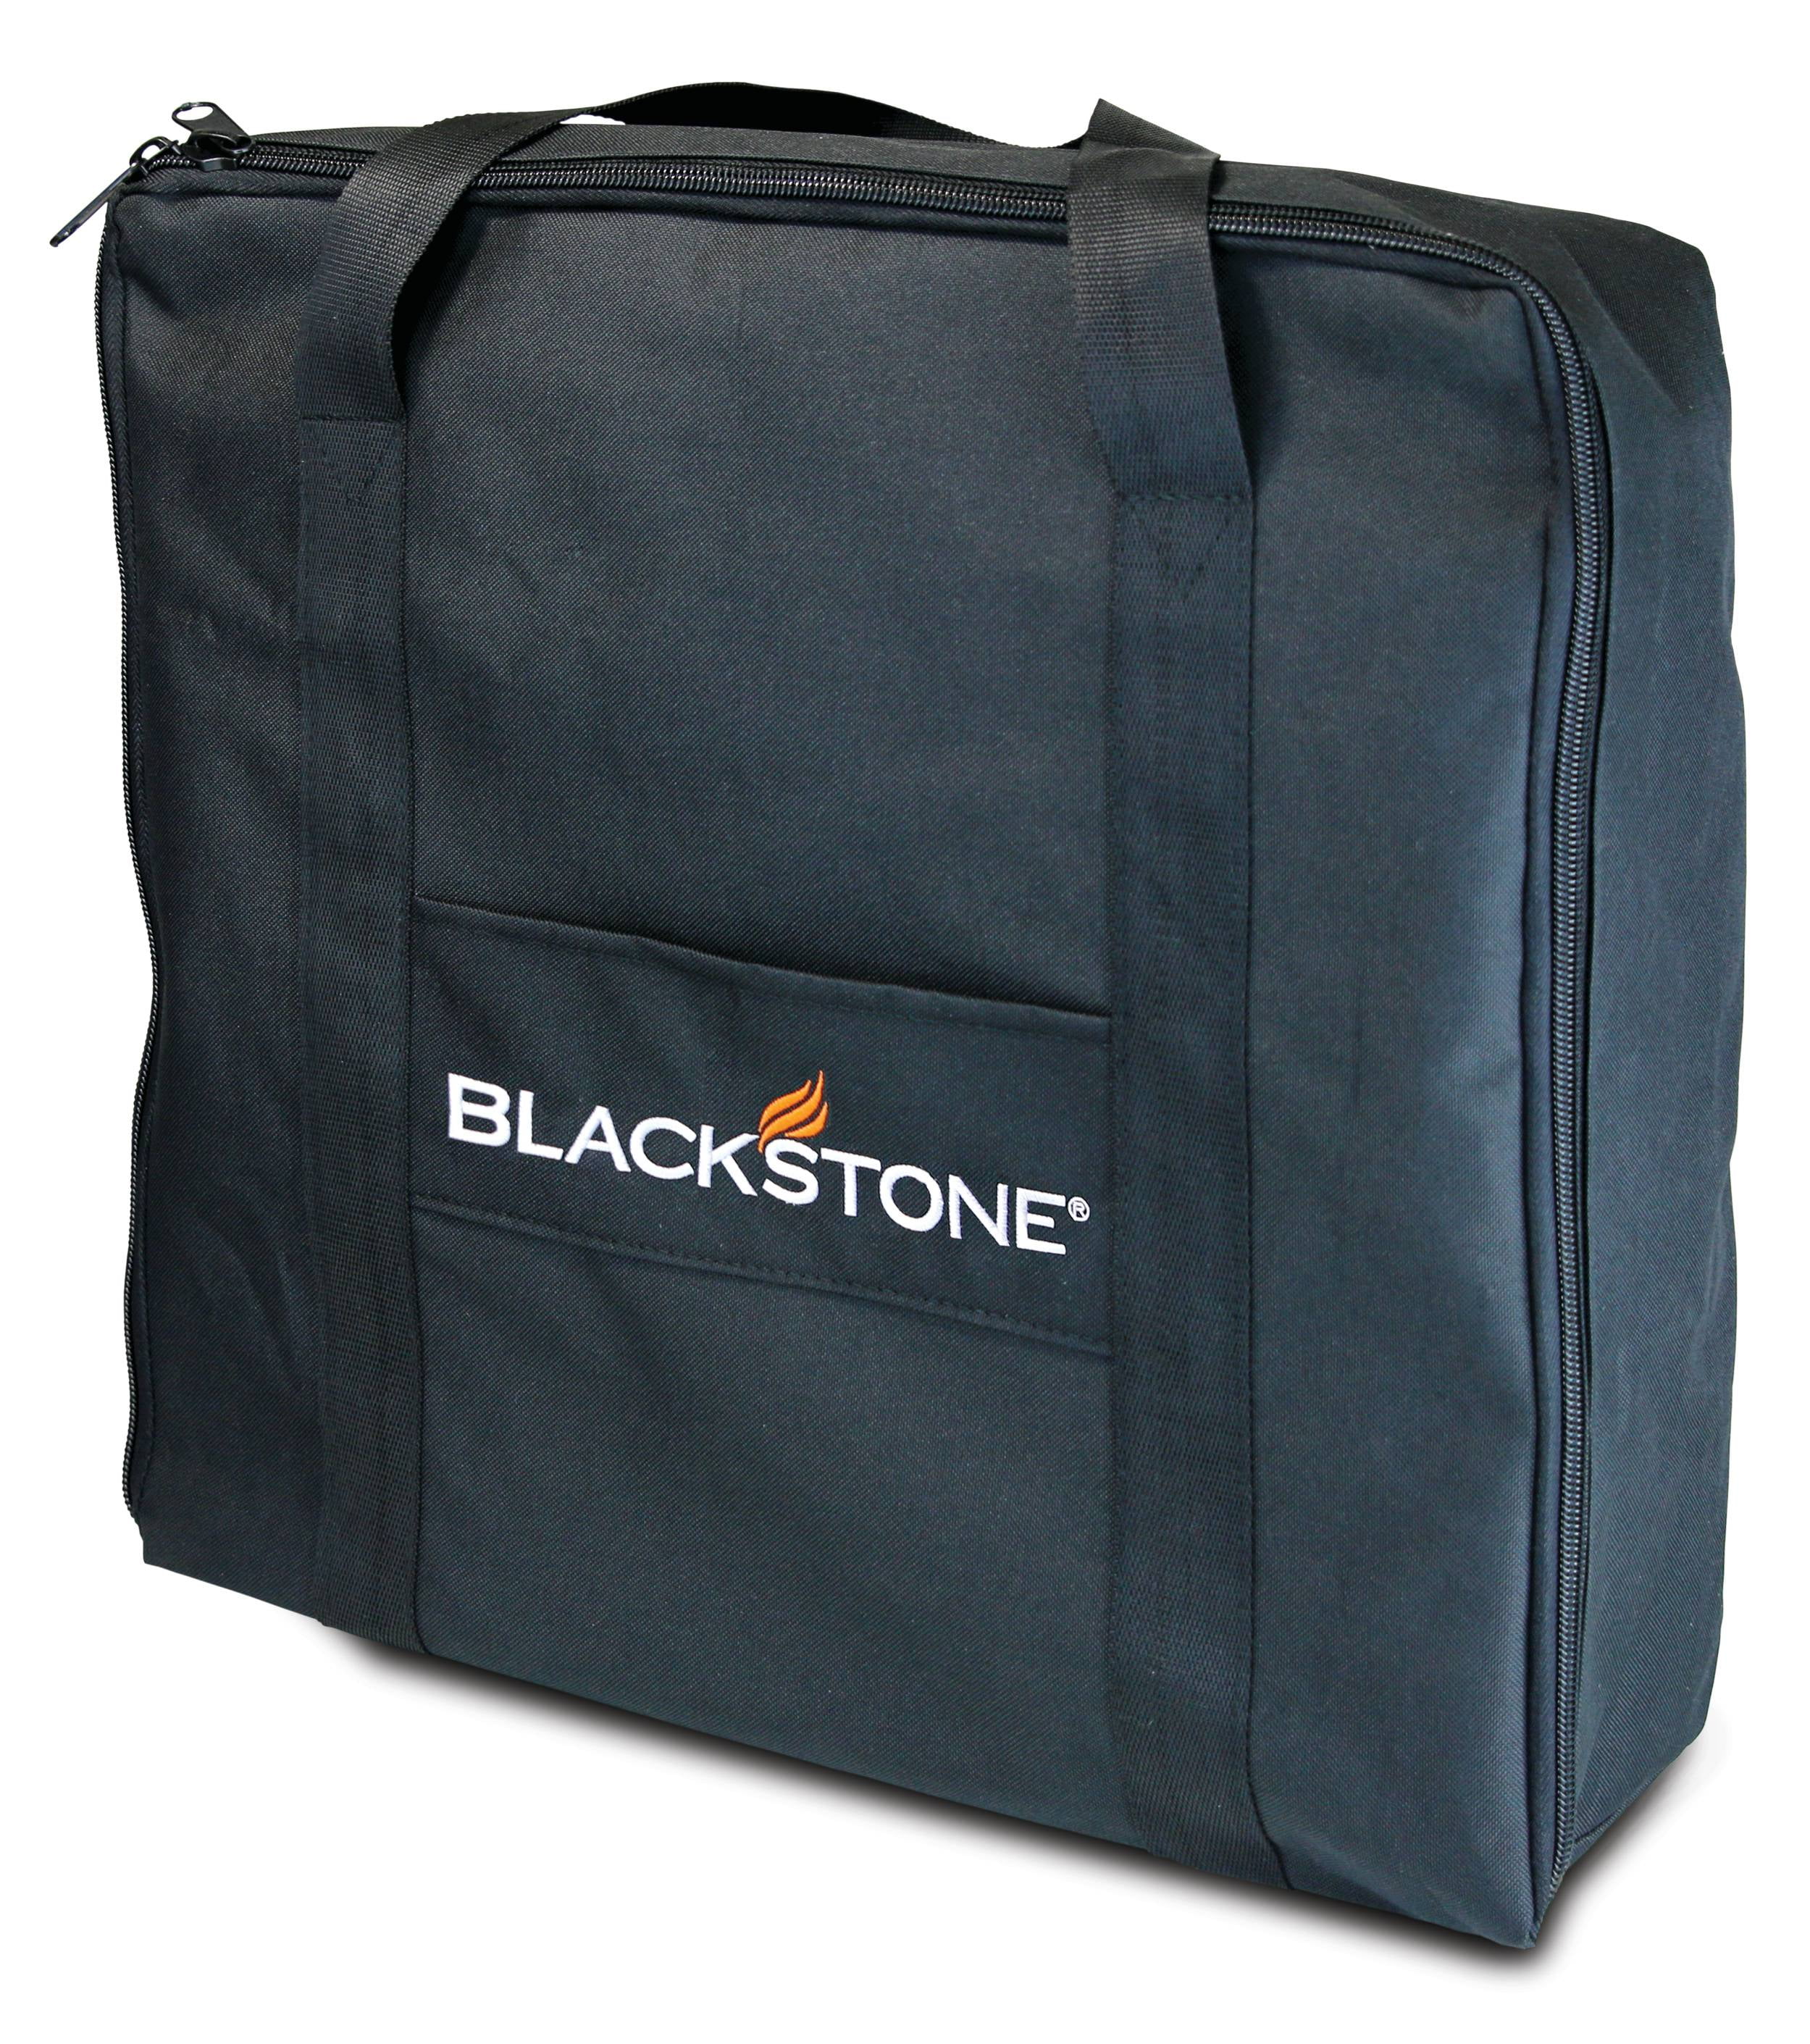 Blackstone 1720 Tabletop Griddle Cover and Carry Bag Set 17" 